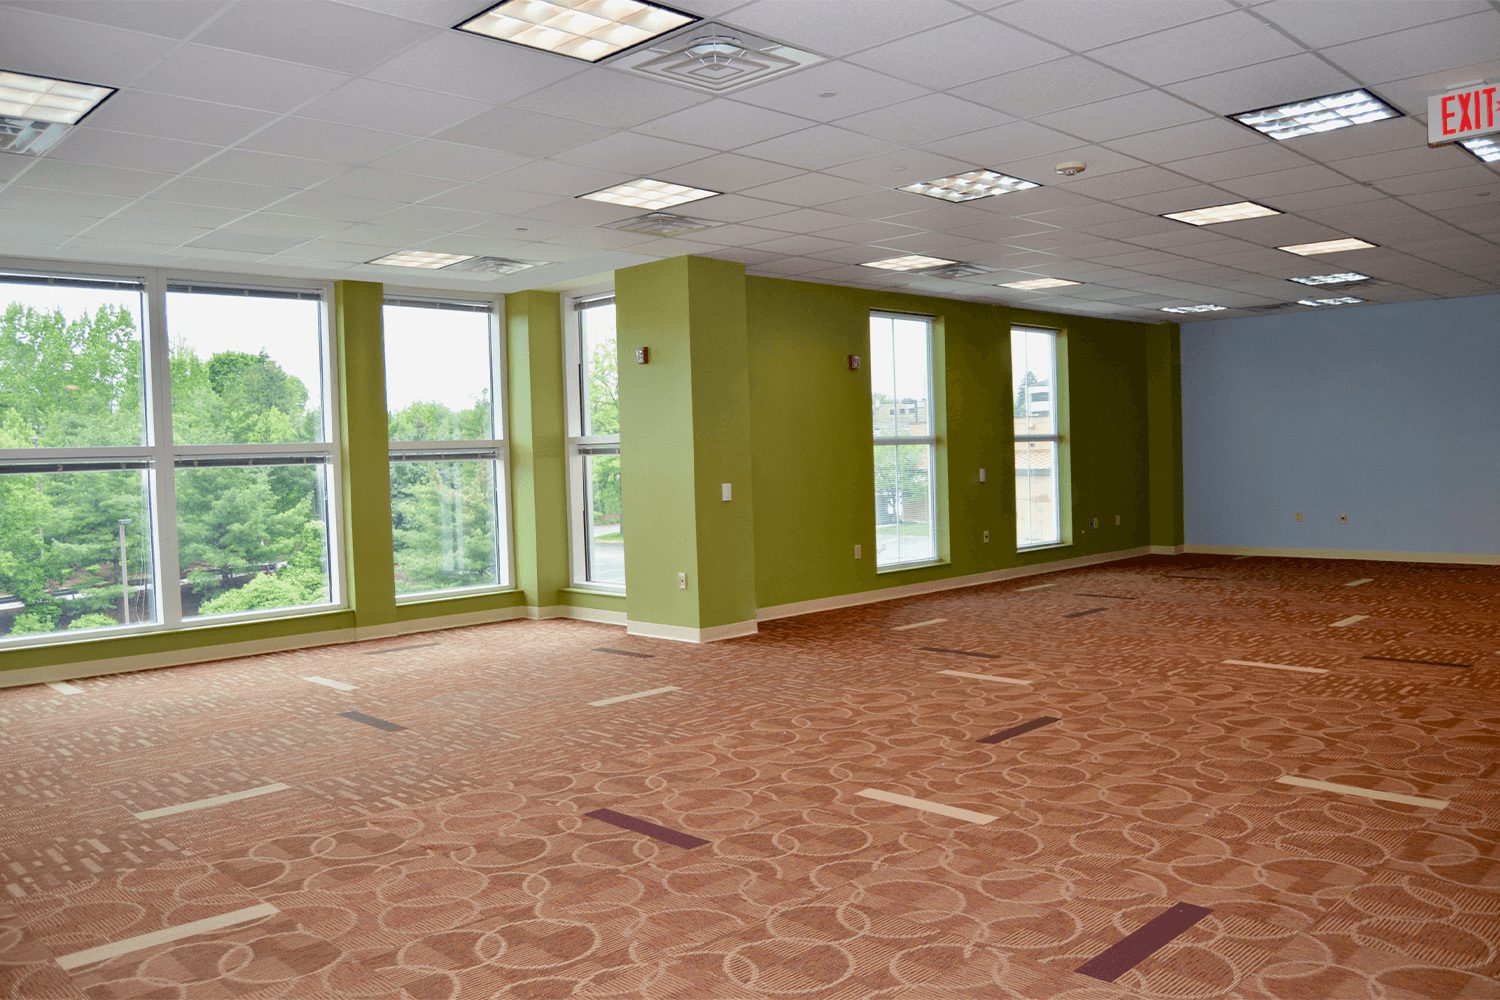 Large office space with bright green and blue walls and large windows